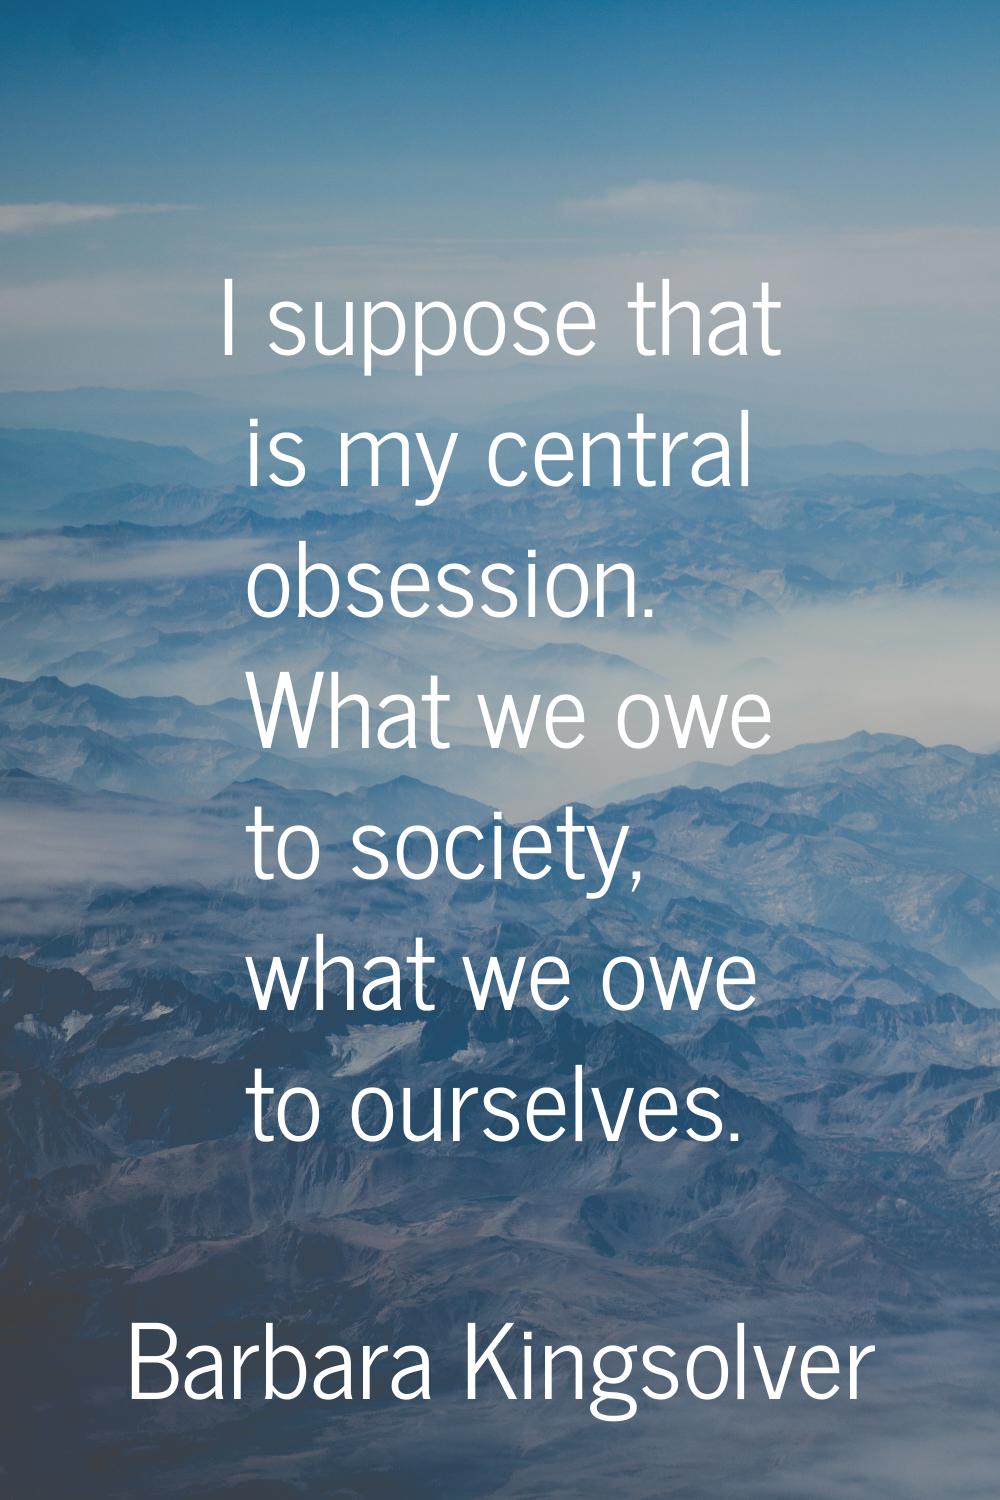 I suppose that is my central obsession. What we owe to society, what we owe to ourselves.